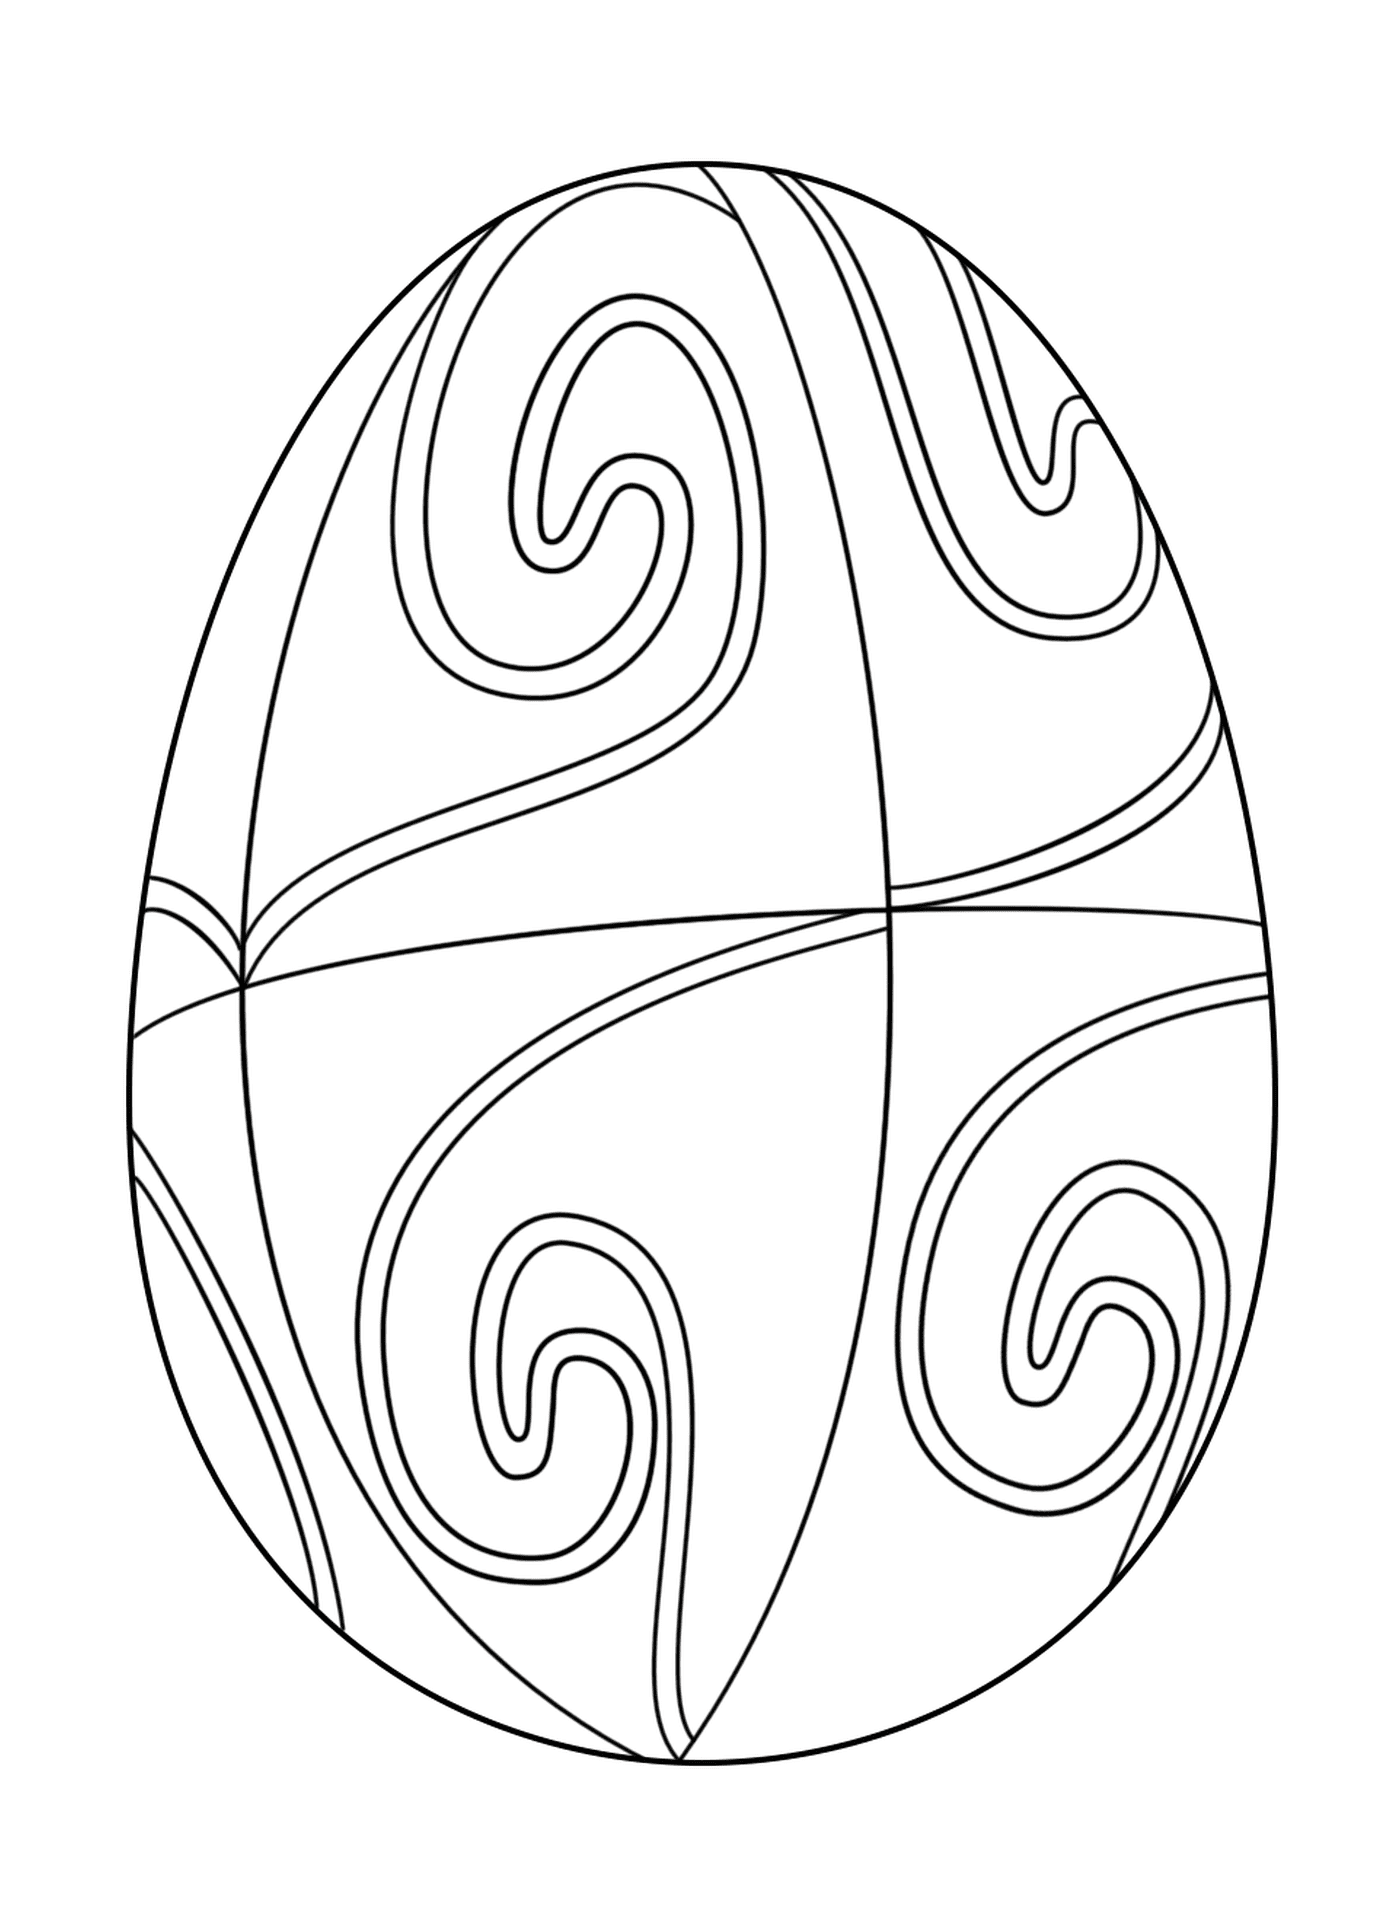  Easter egg with spiral pattern 